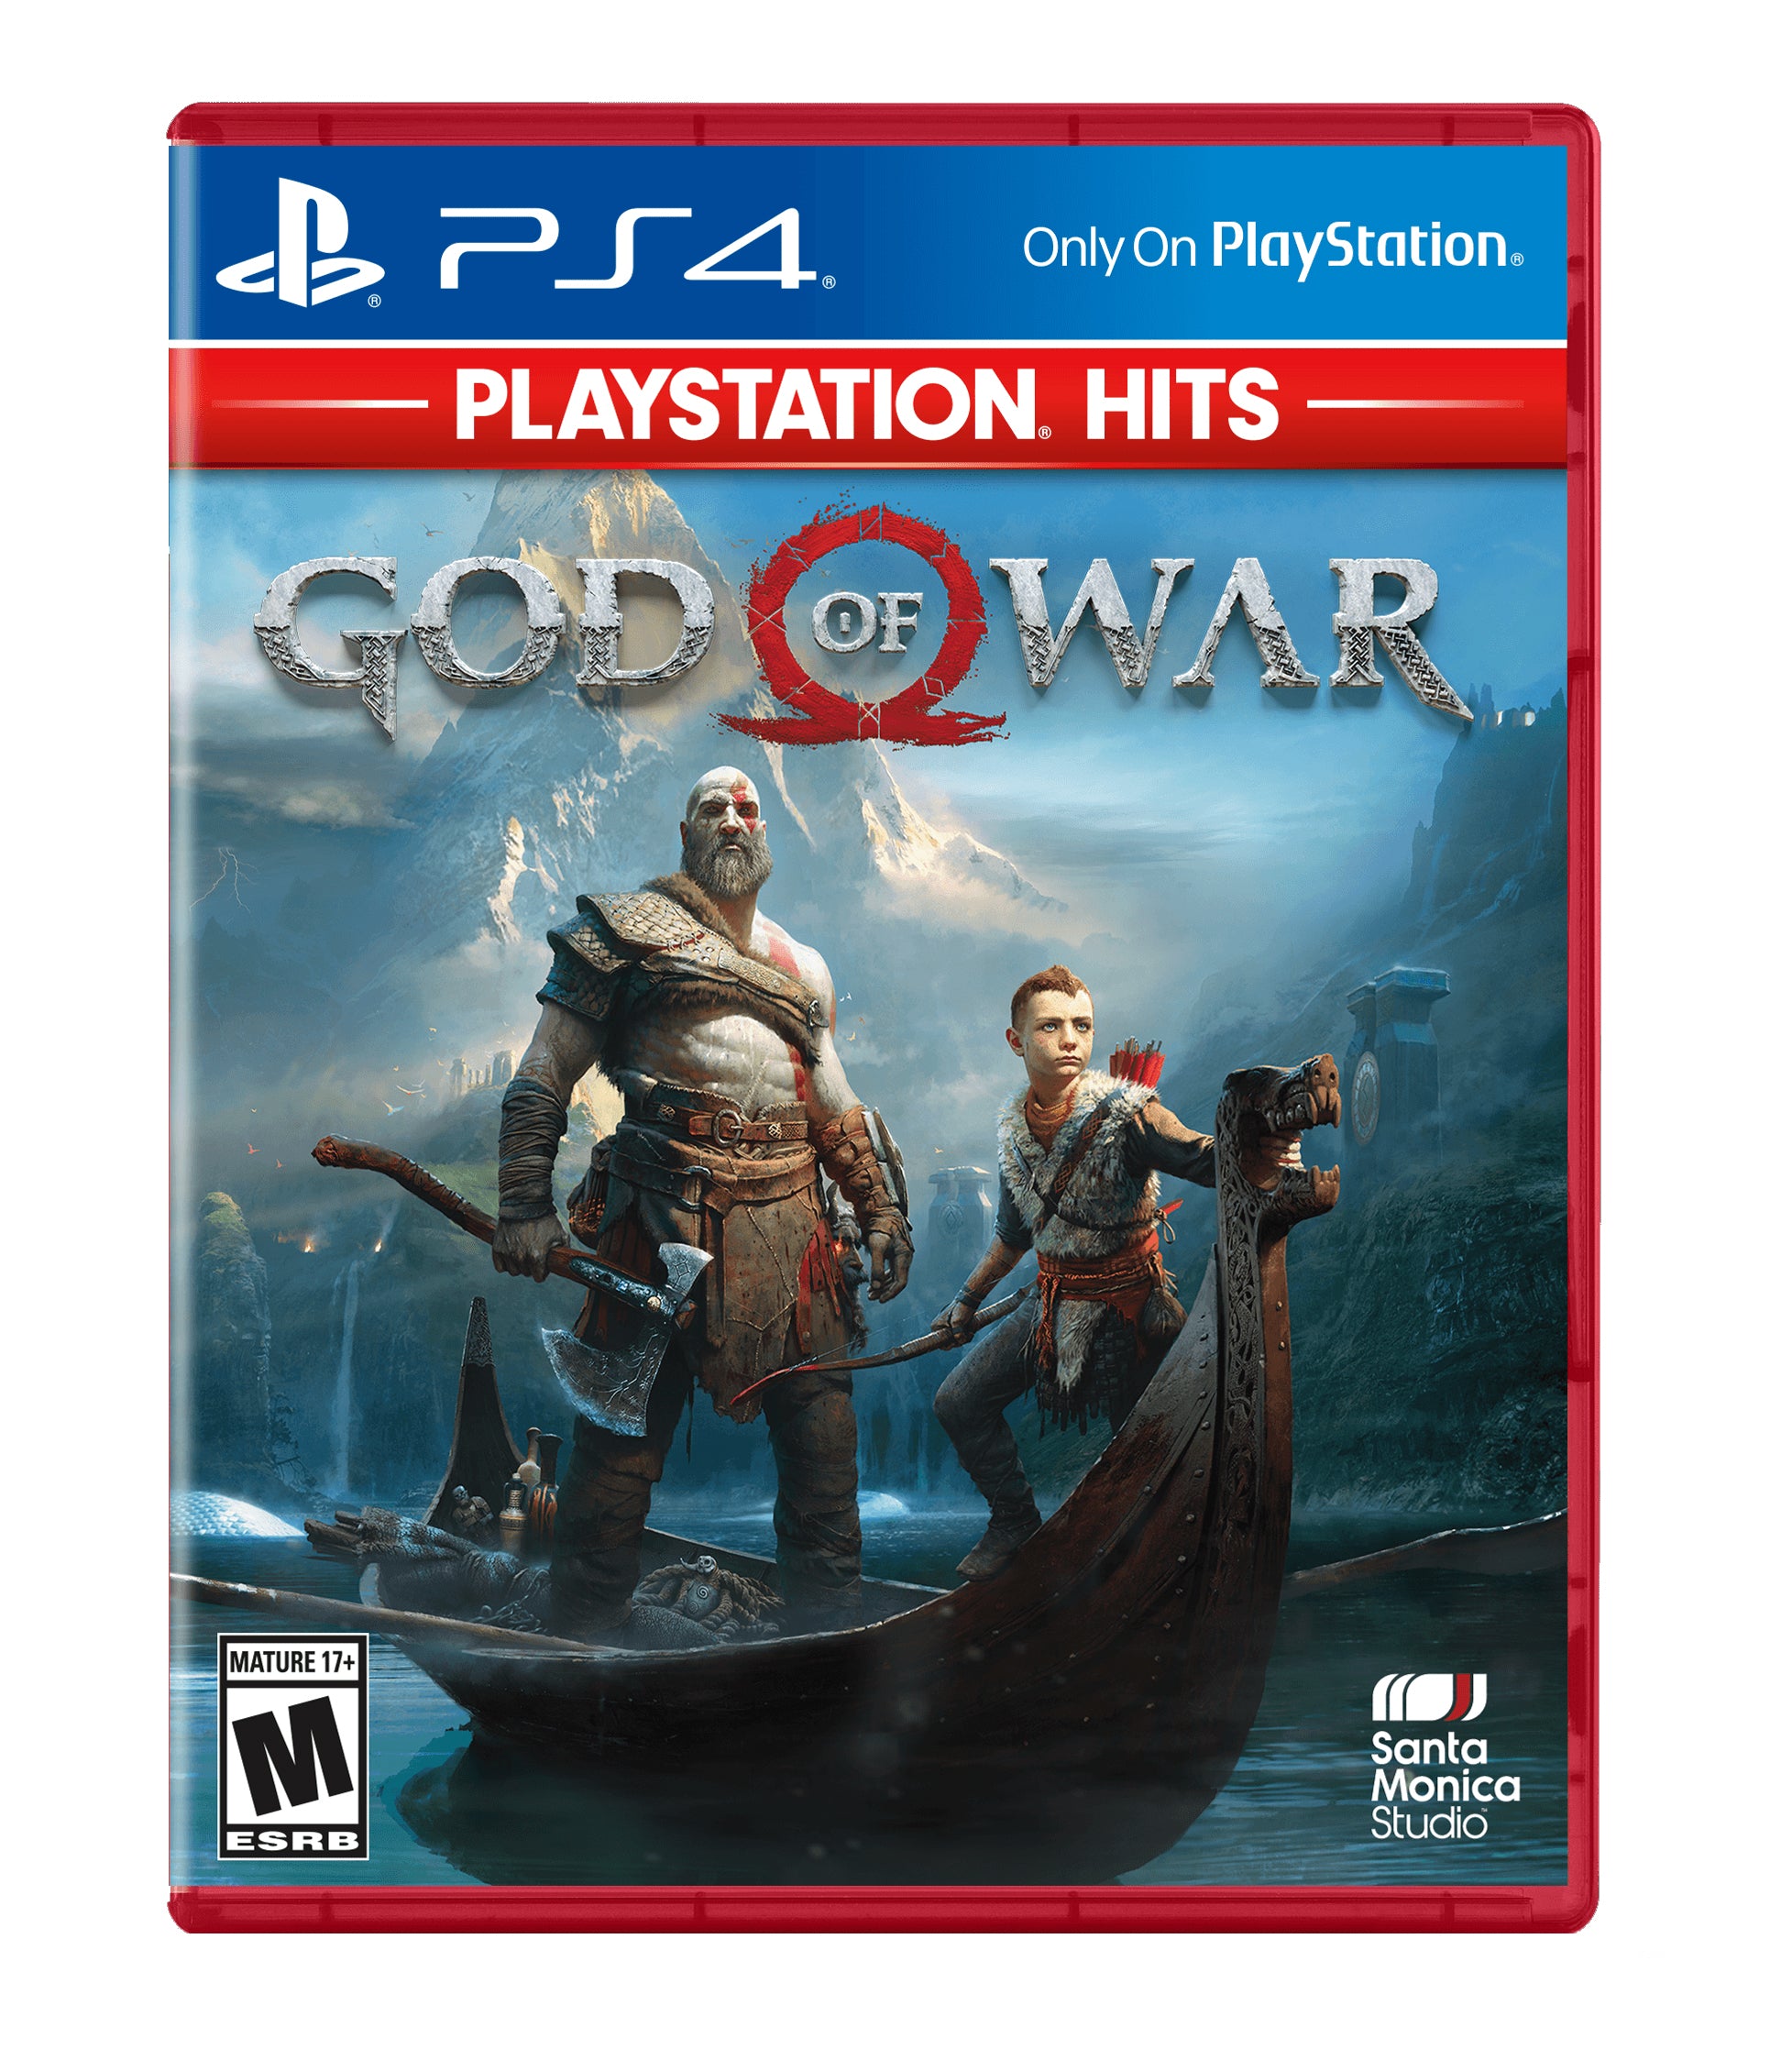 Sony PlayStation 4 Slim God of War PlayStation Hits Bundle 1TB PS4 Gaming Console, Jet Black, with Mytrix High Speed HDMI